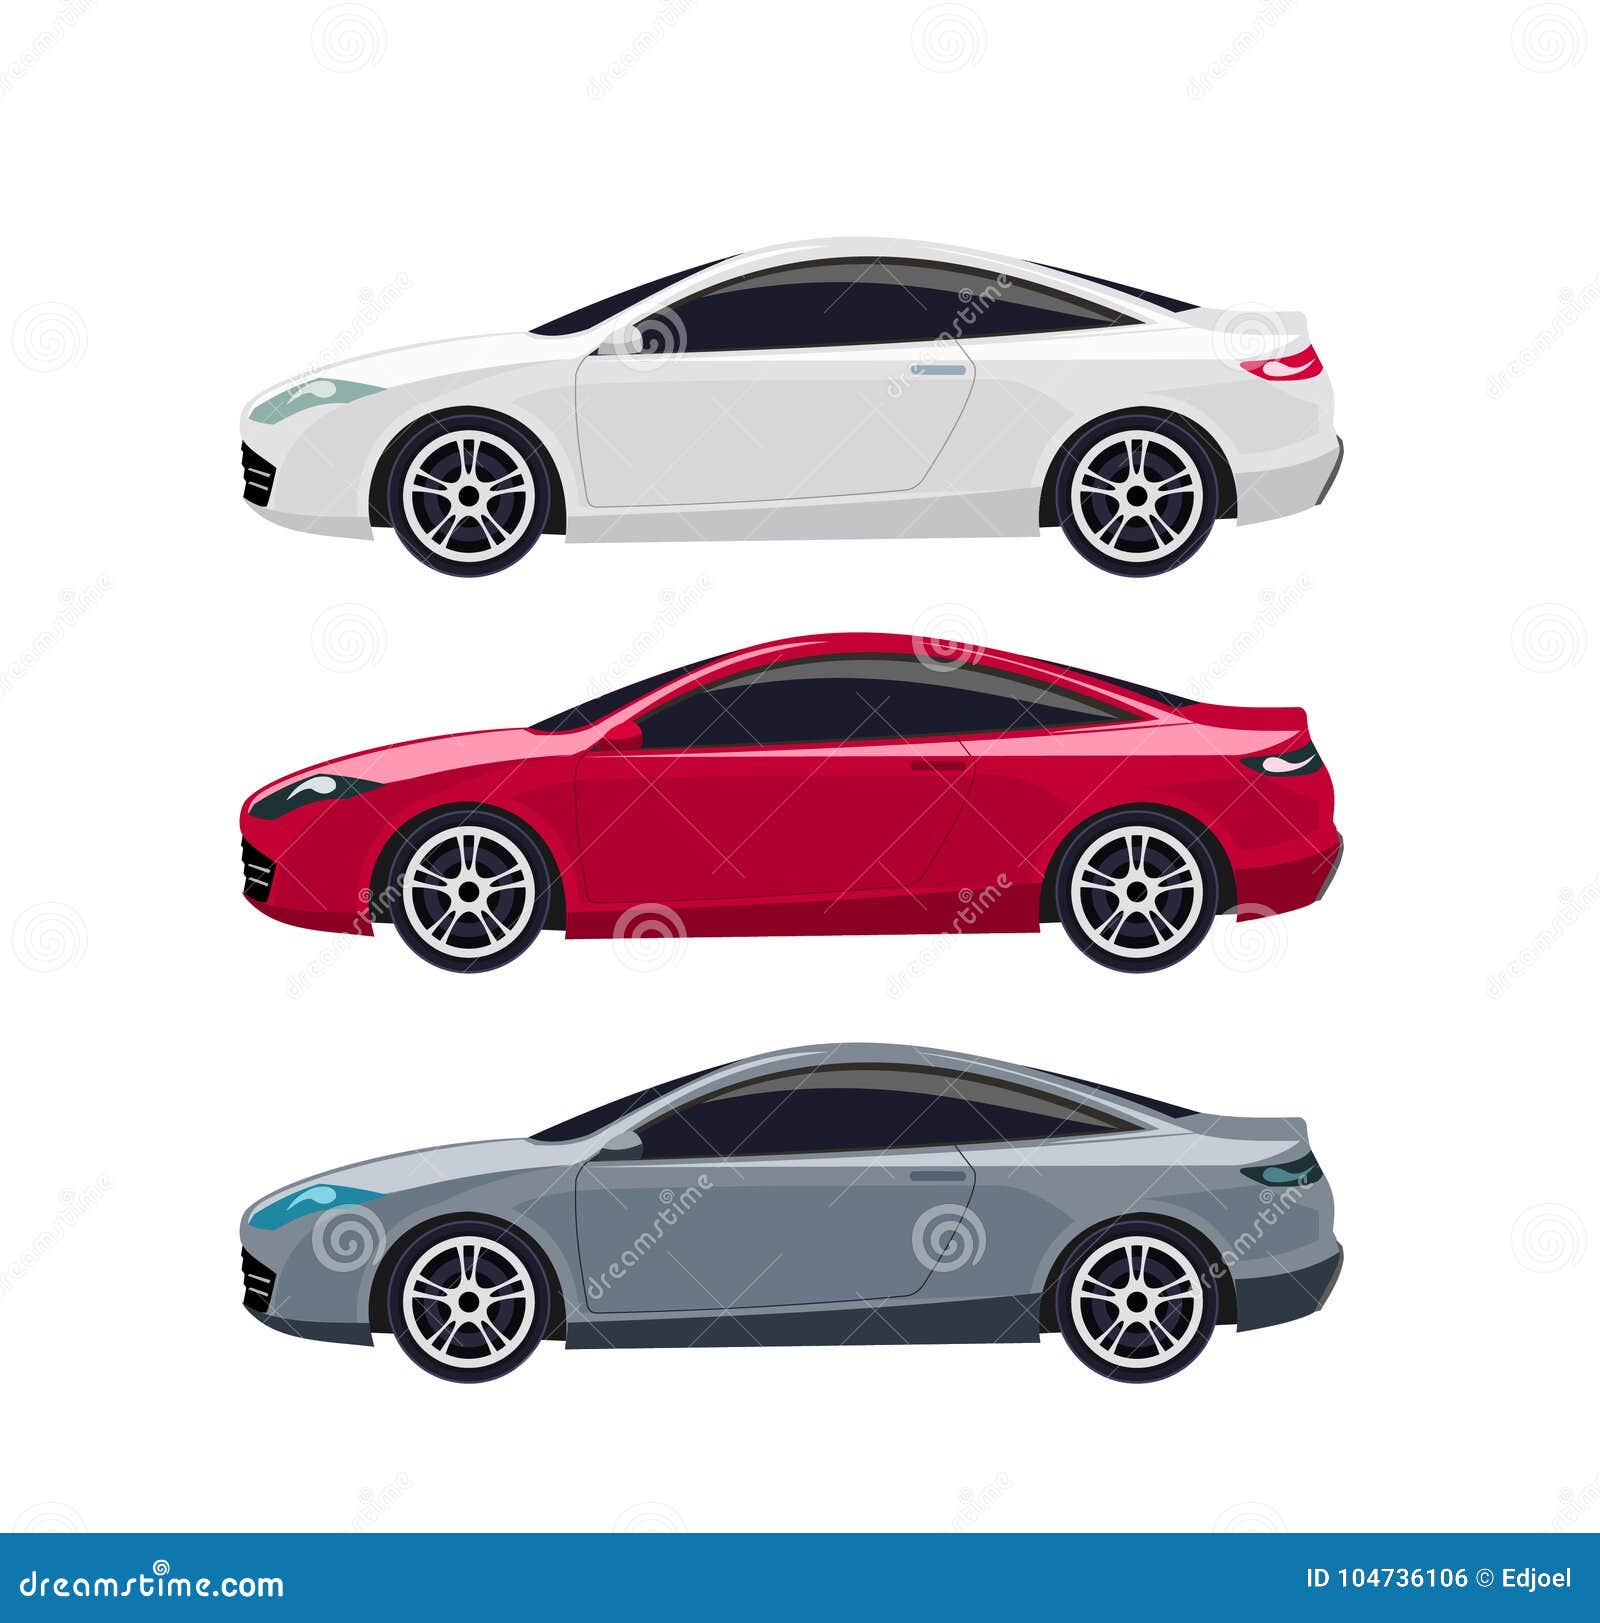 model red and blue of profile cars. super modern cars sports